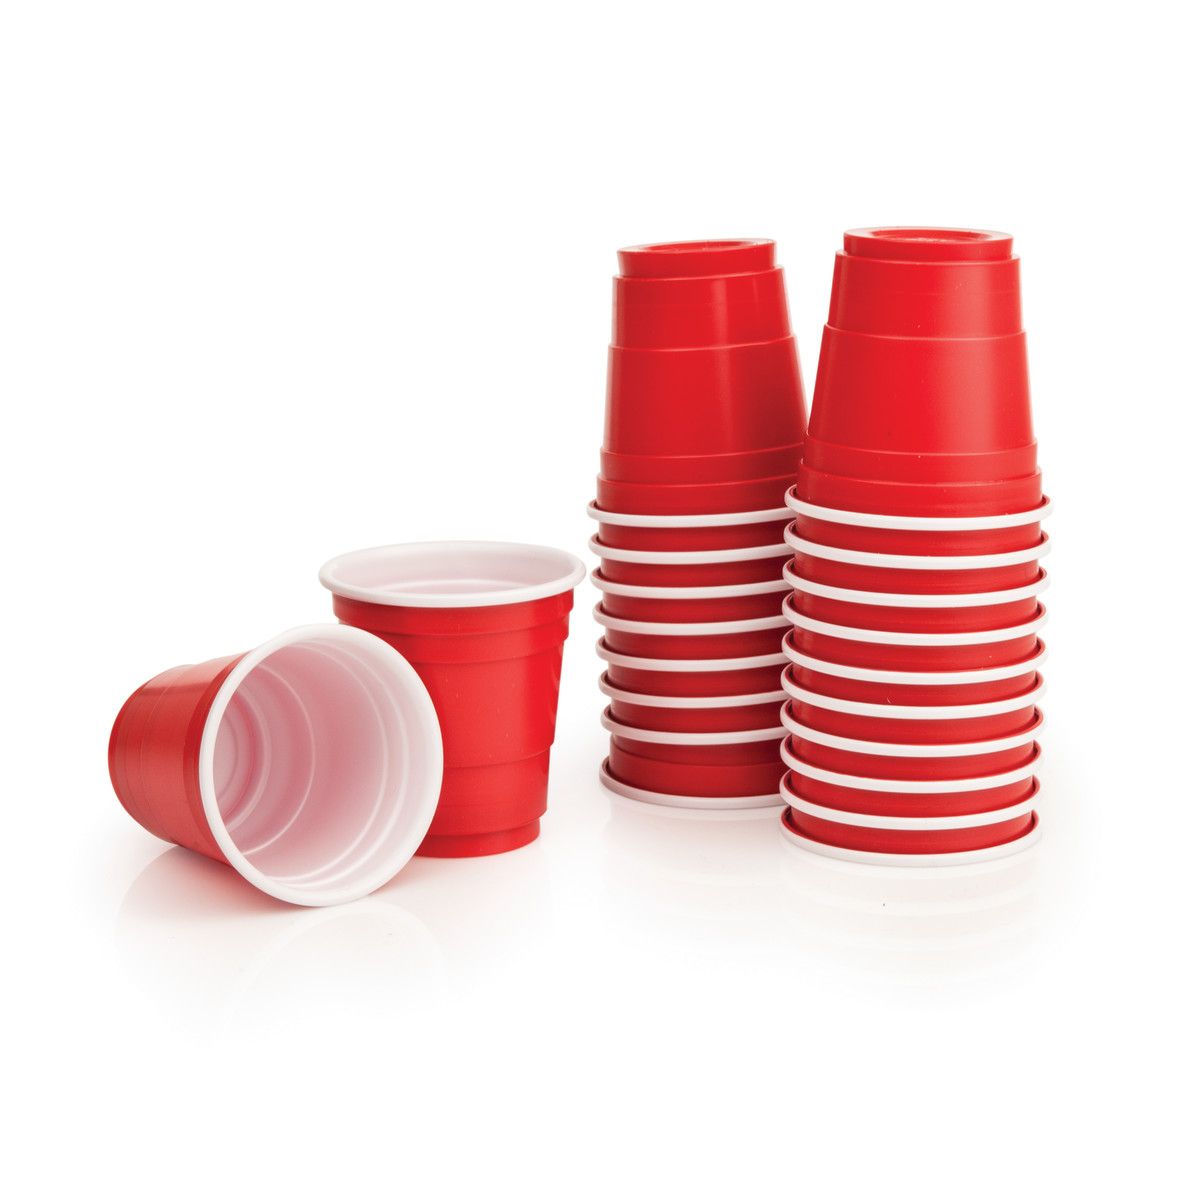 Fast Delivery to Your Door Lil Red's Cups, red solo cups 